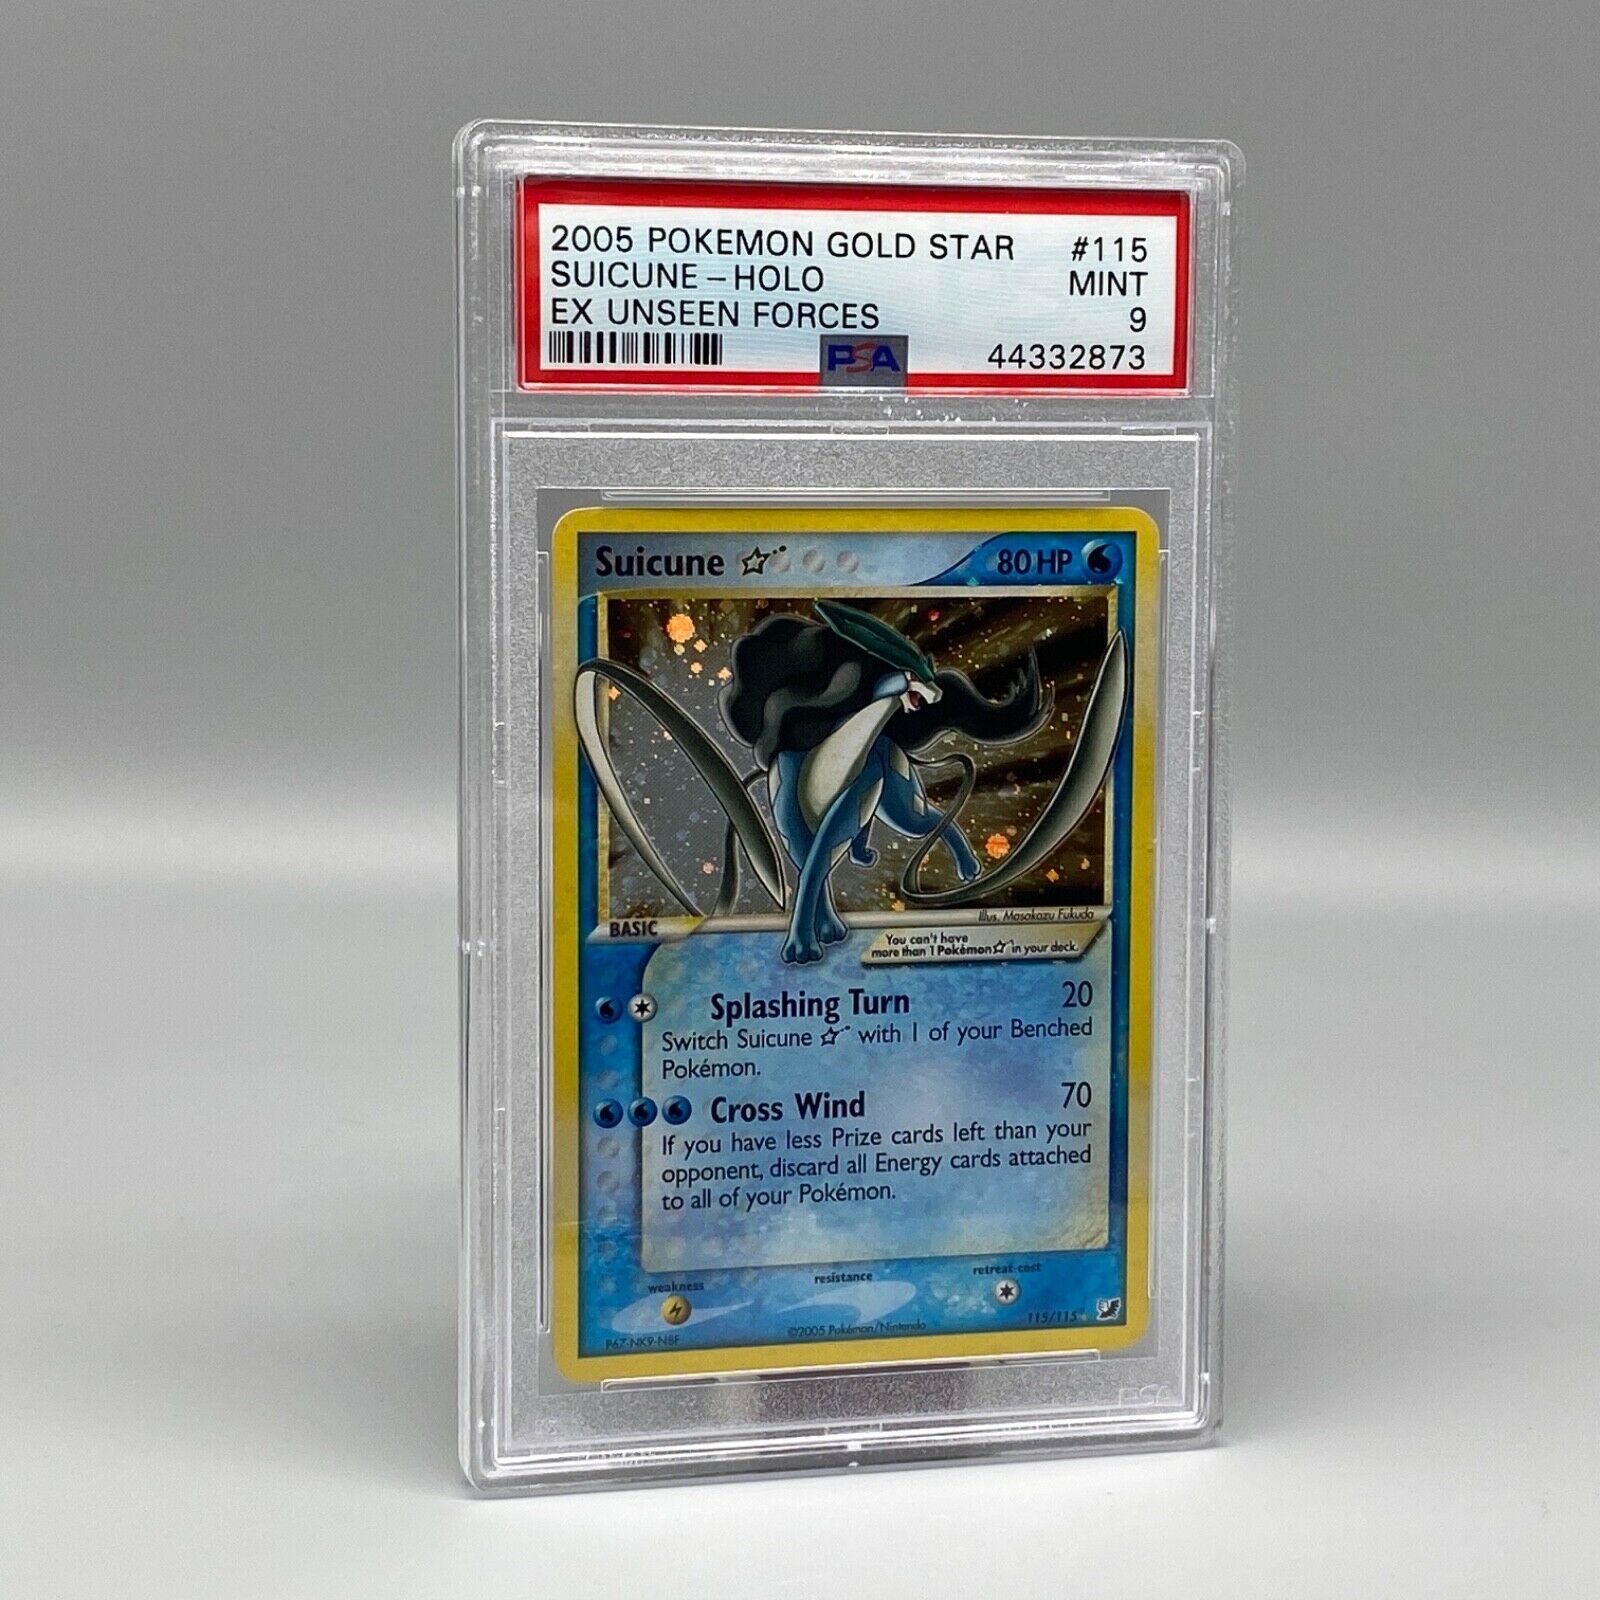 Carte POKEMON  Suicune  Gold Star  115115  EX Unseen Forces  PSA PCA 9